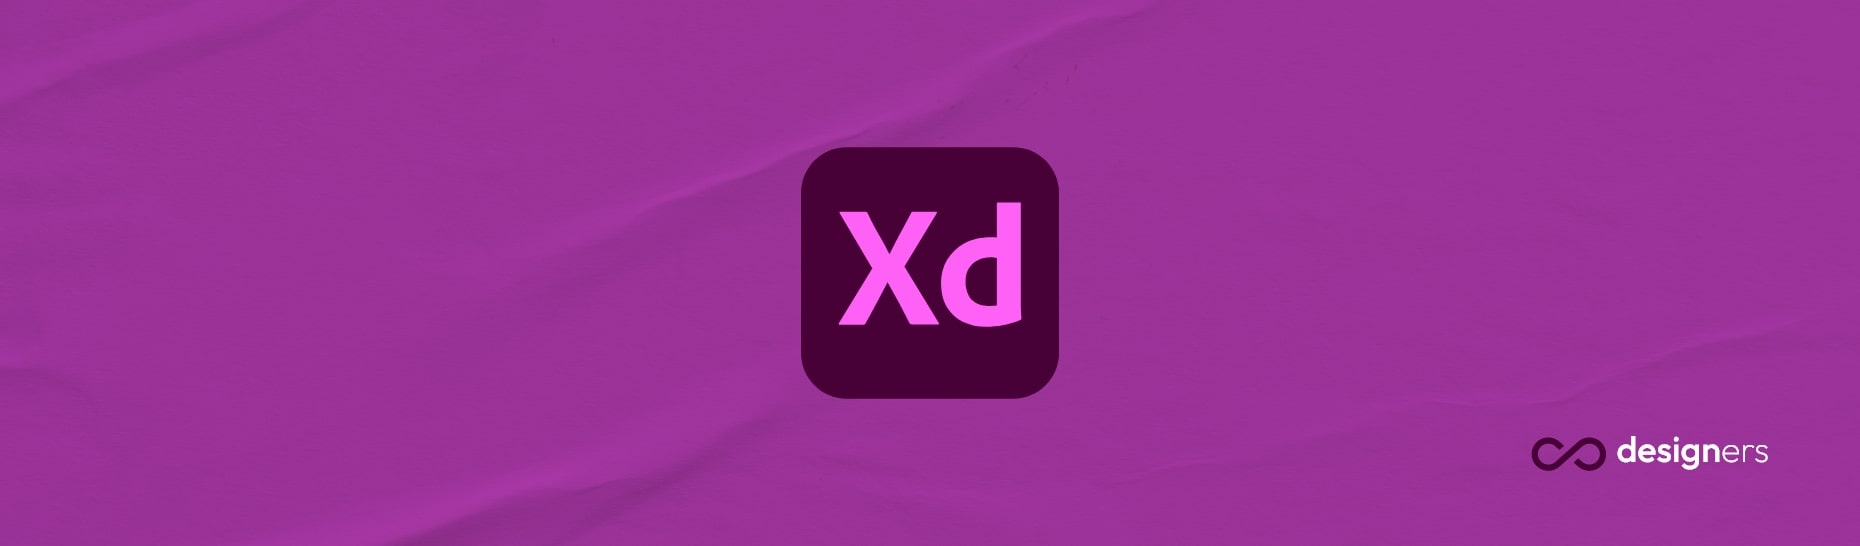 Is Adobe XD for UI or UX design?